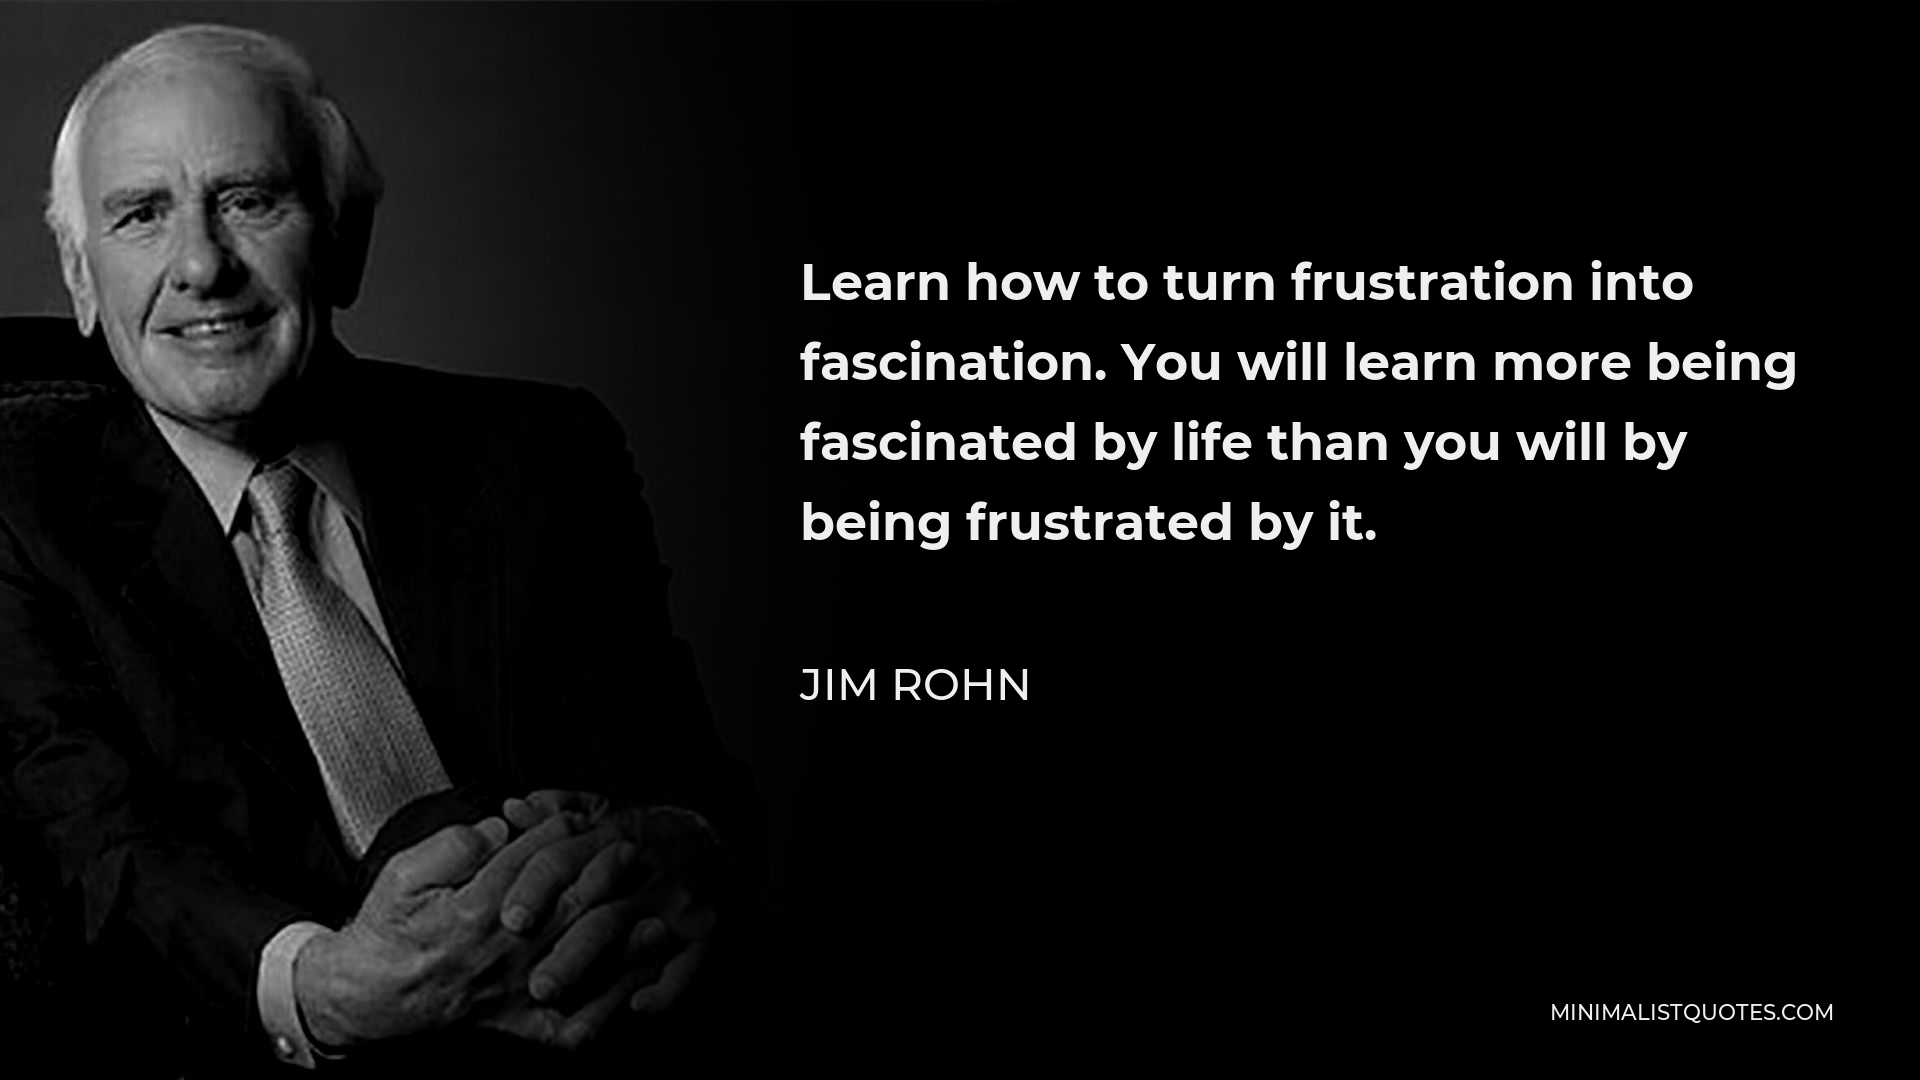 Jim Rohn Quote - Learn how to turn frustration into fascination. You will learn more being fascinated by life than you will by being frustrated by it.